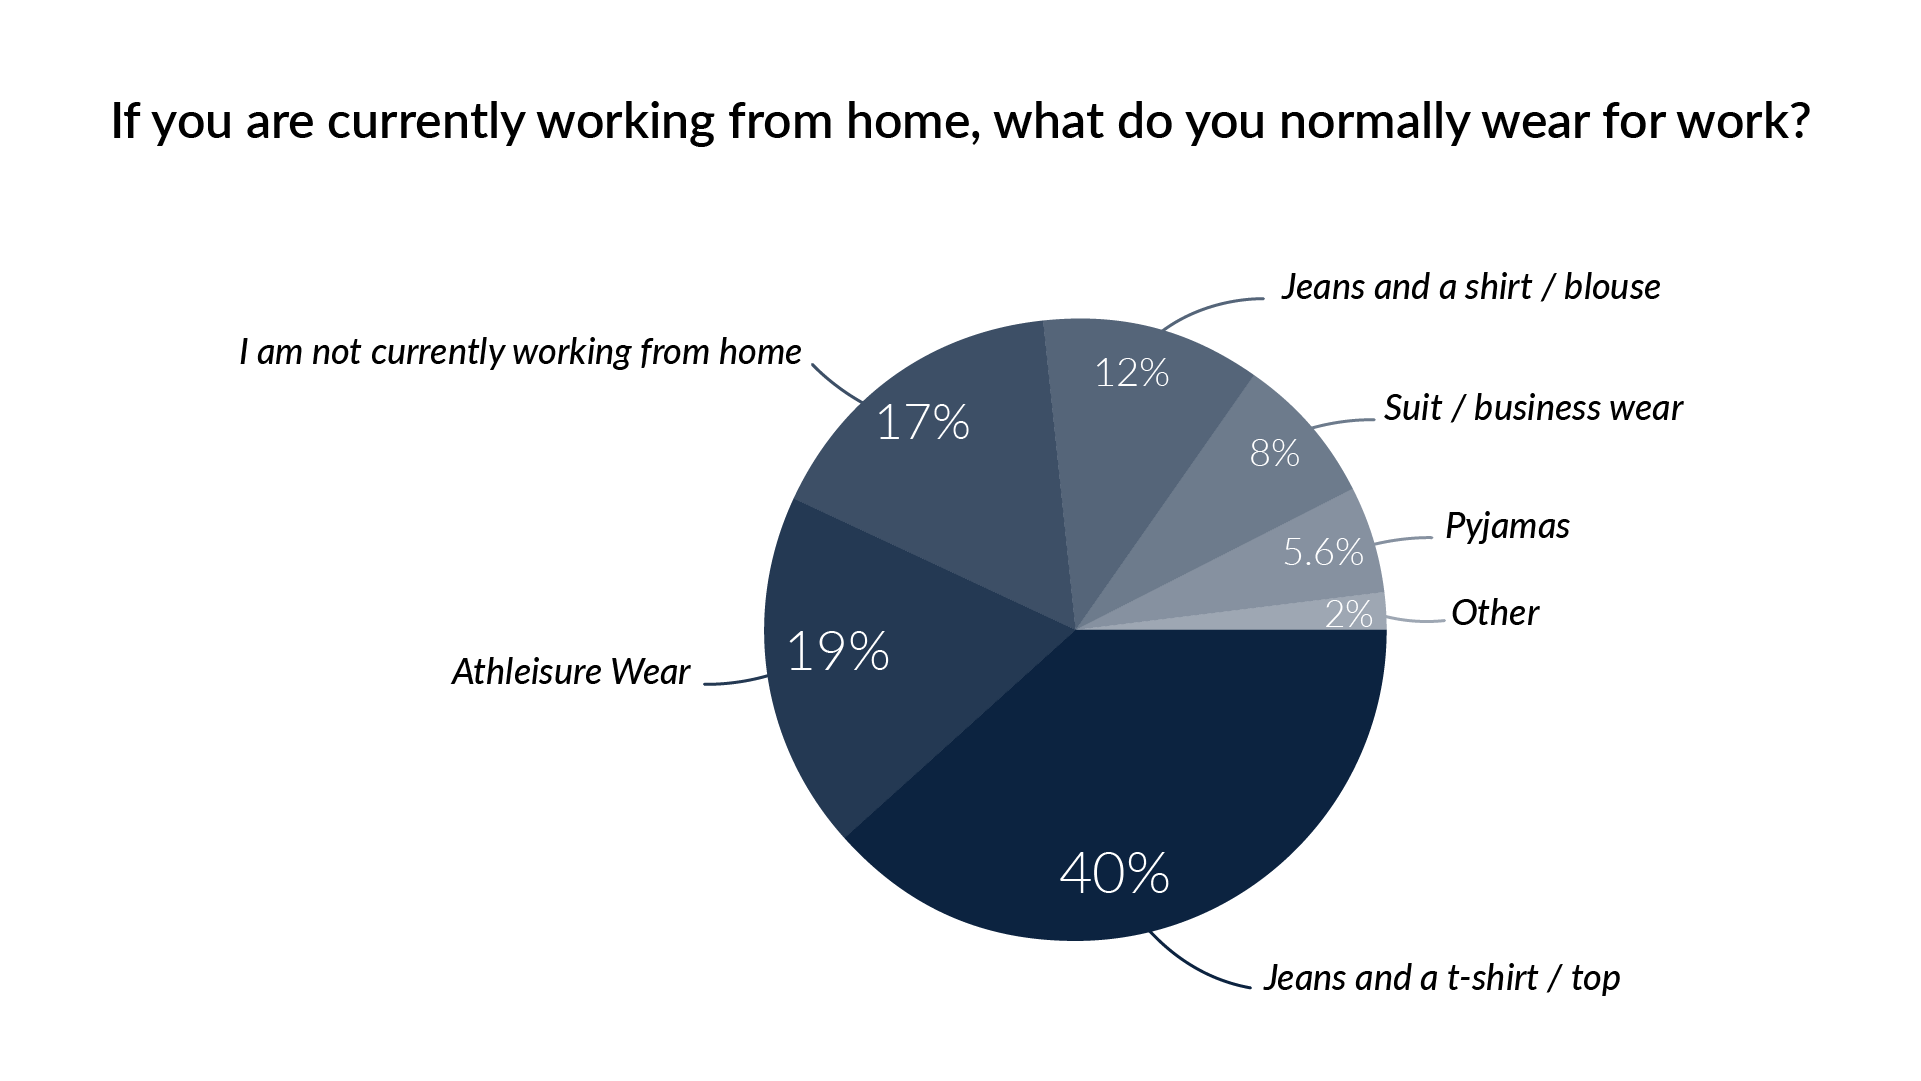 If you are currently working from home, what do you normally wear for work?